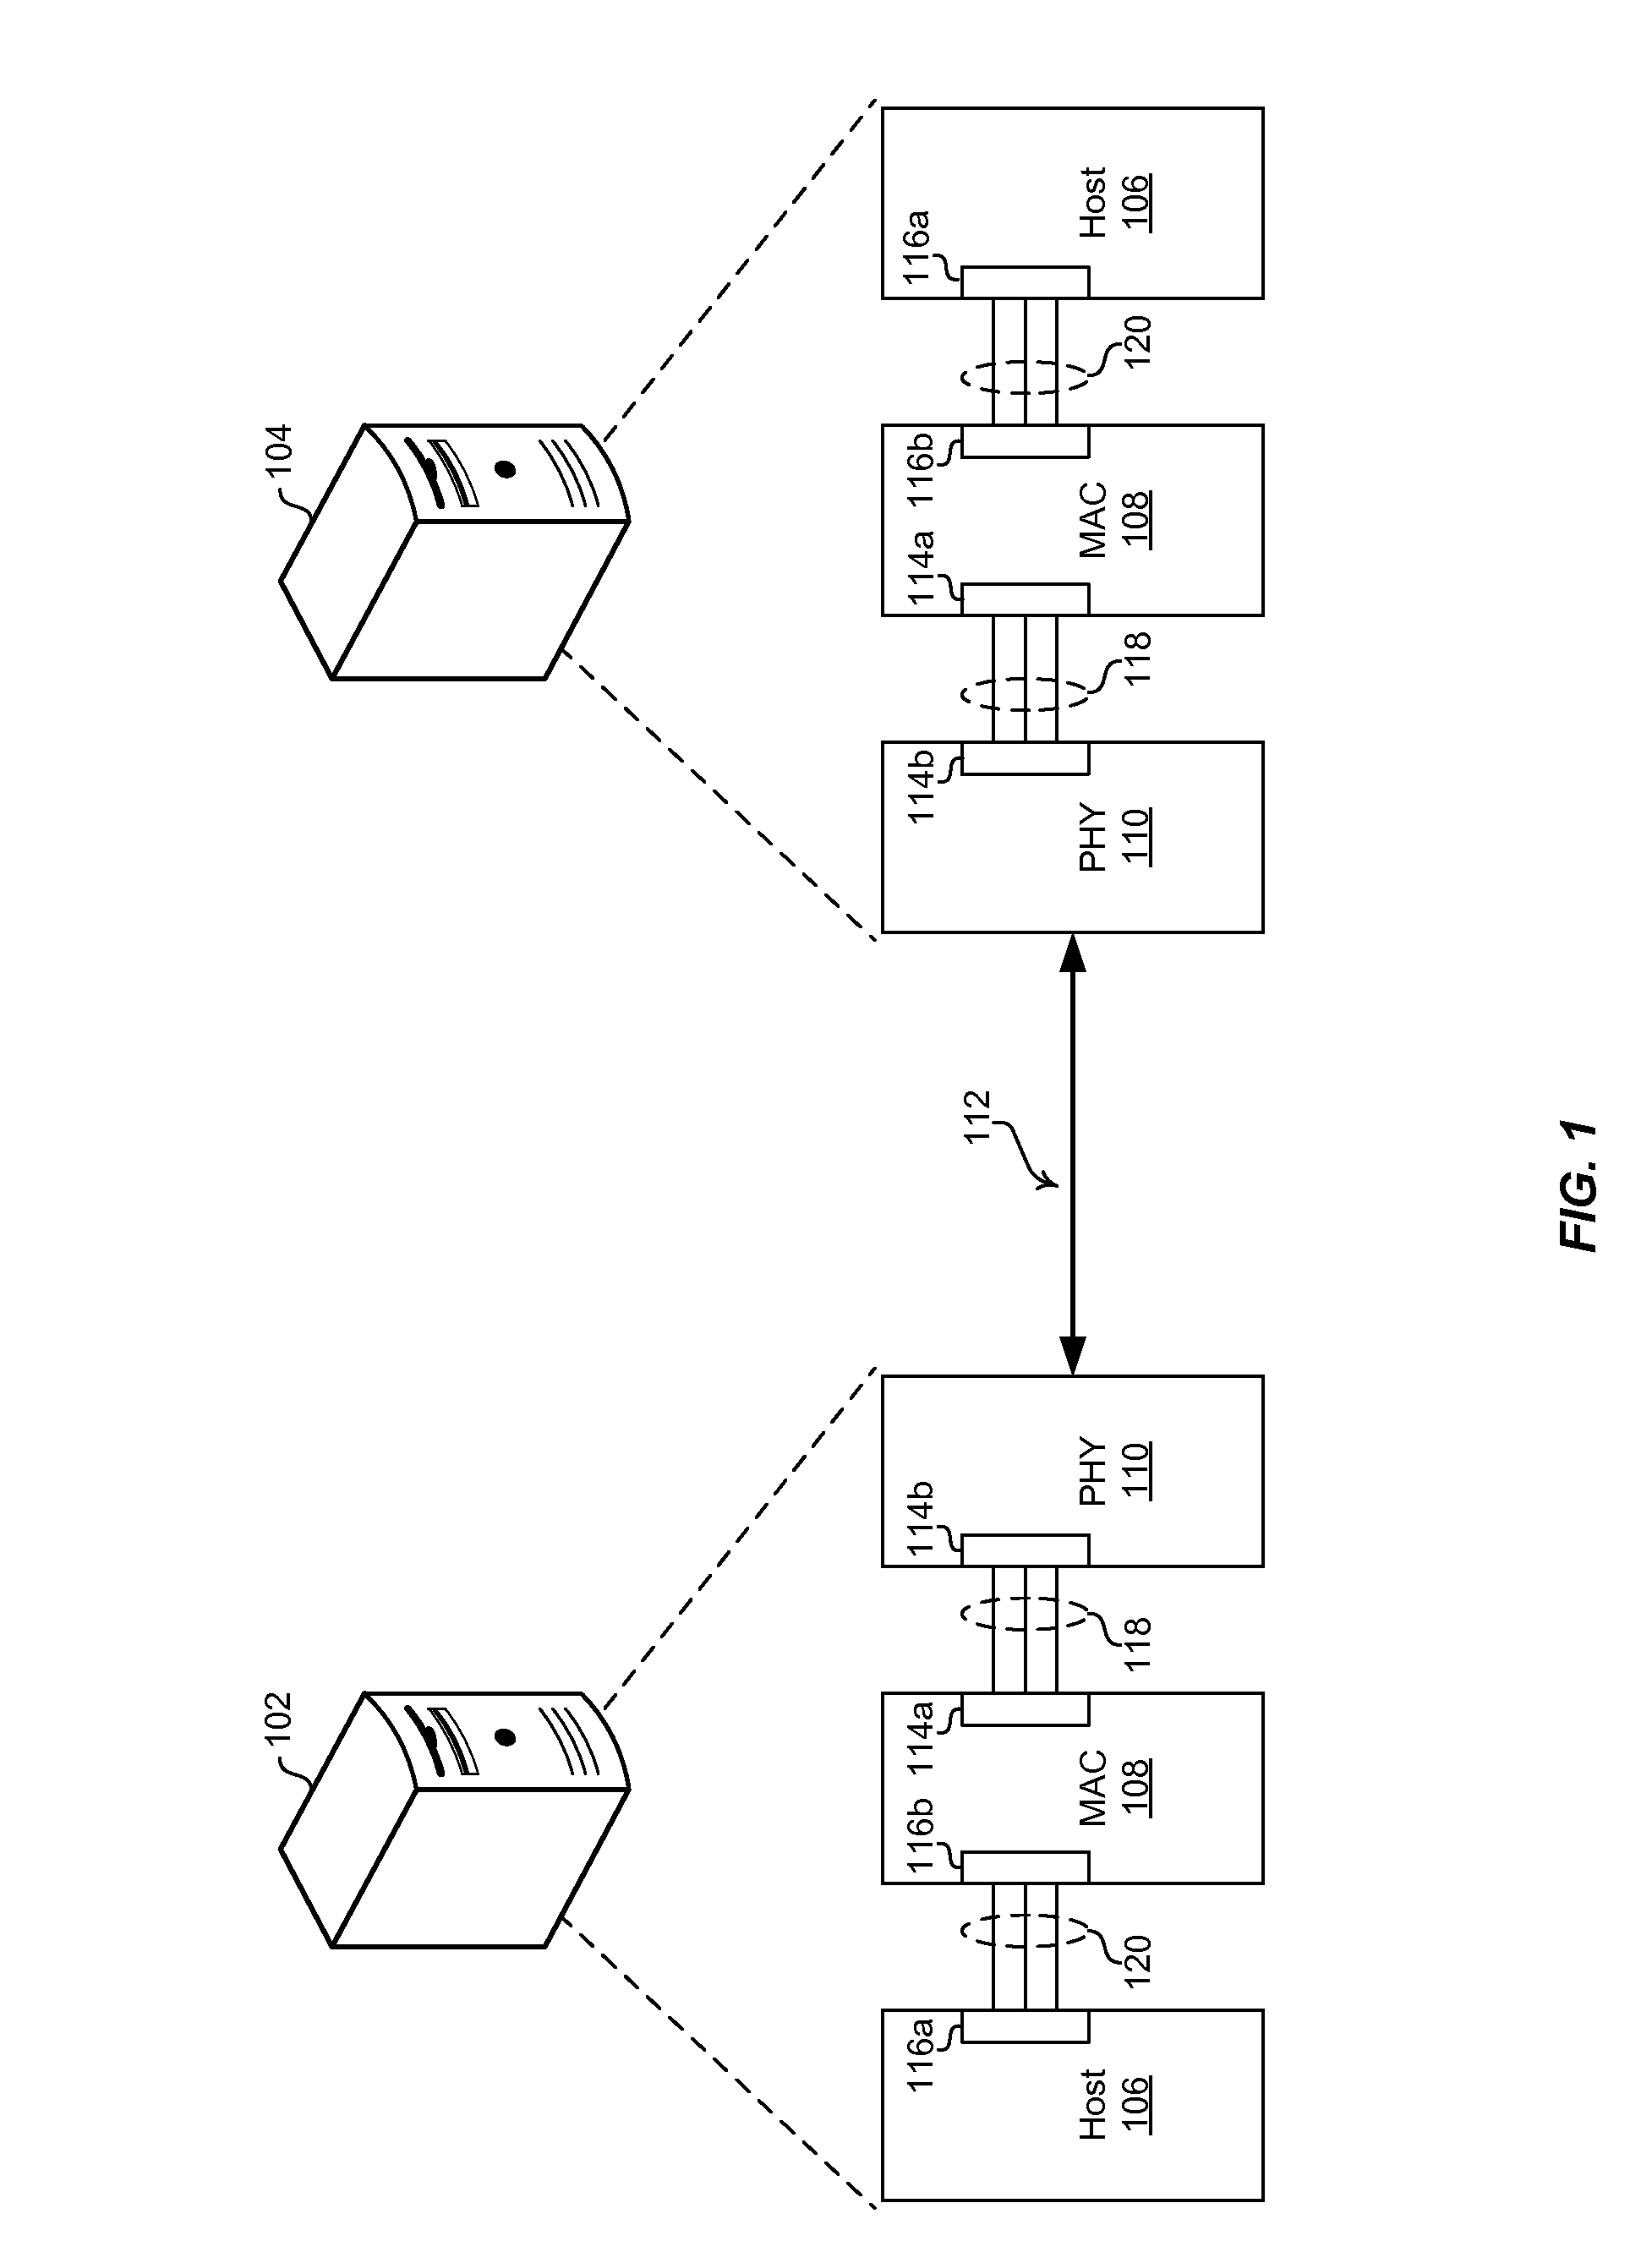 Method and system for self-adapting dynamic power reduction mechanism for physical layer devices in packet data networks